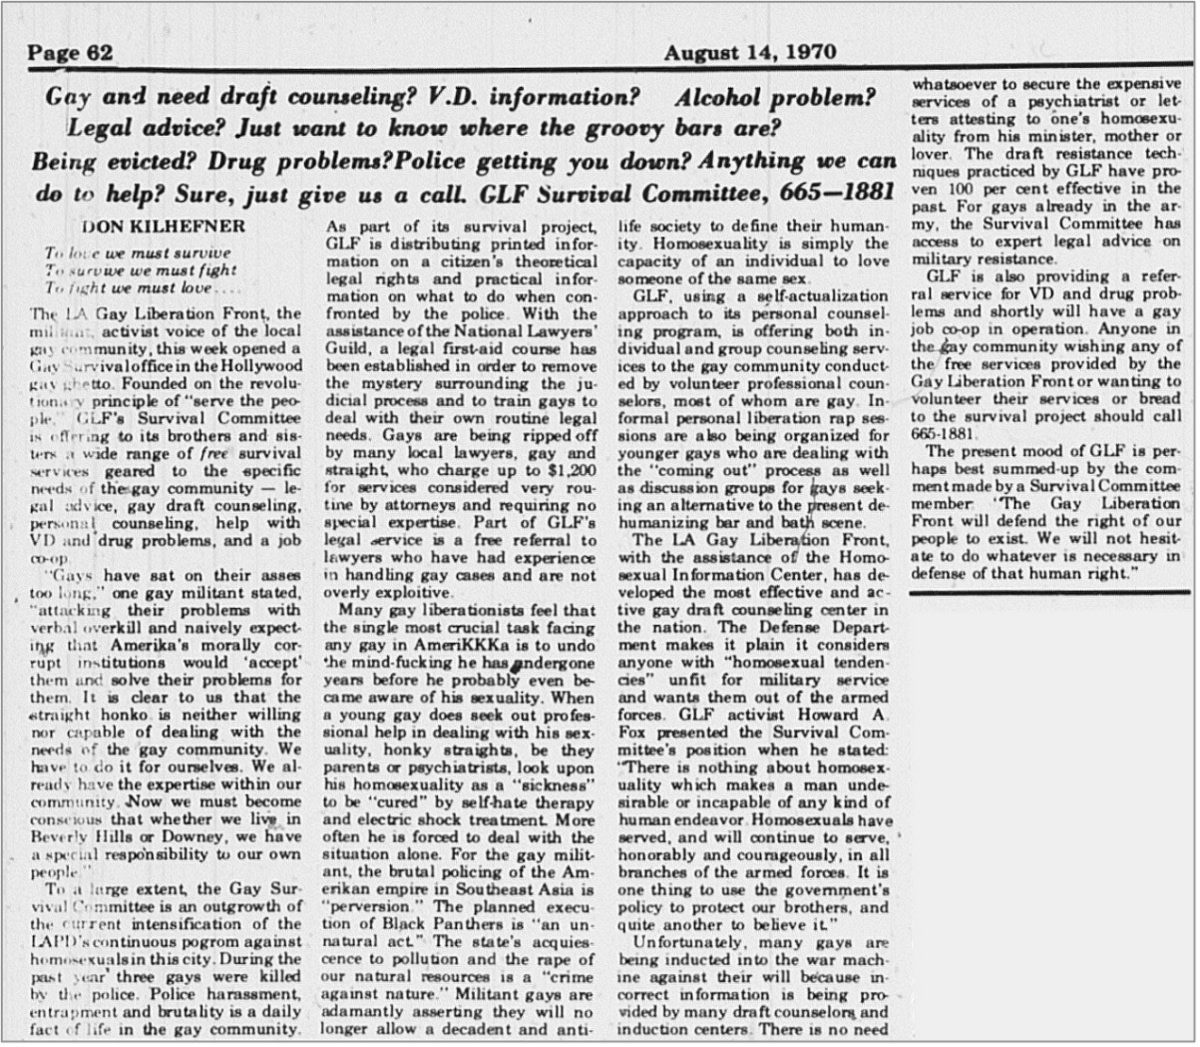 Image of the original August 14, 1970 article from the Free Press.